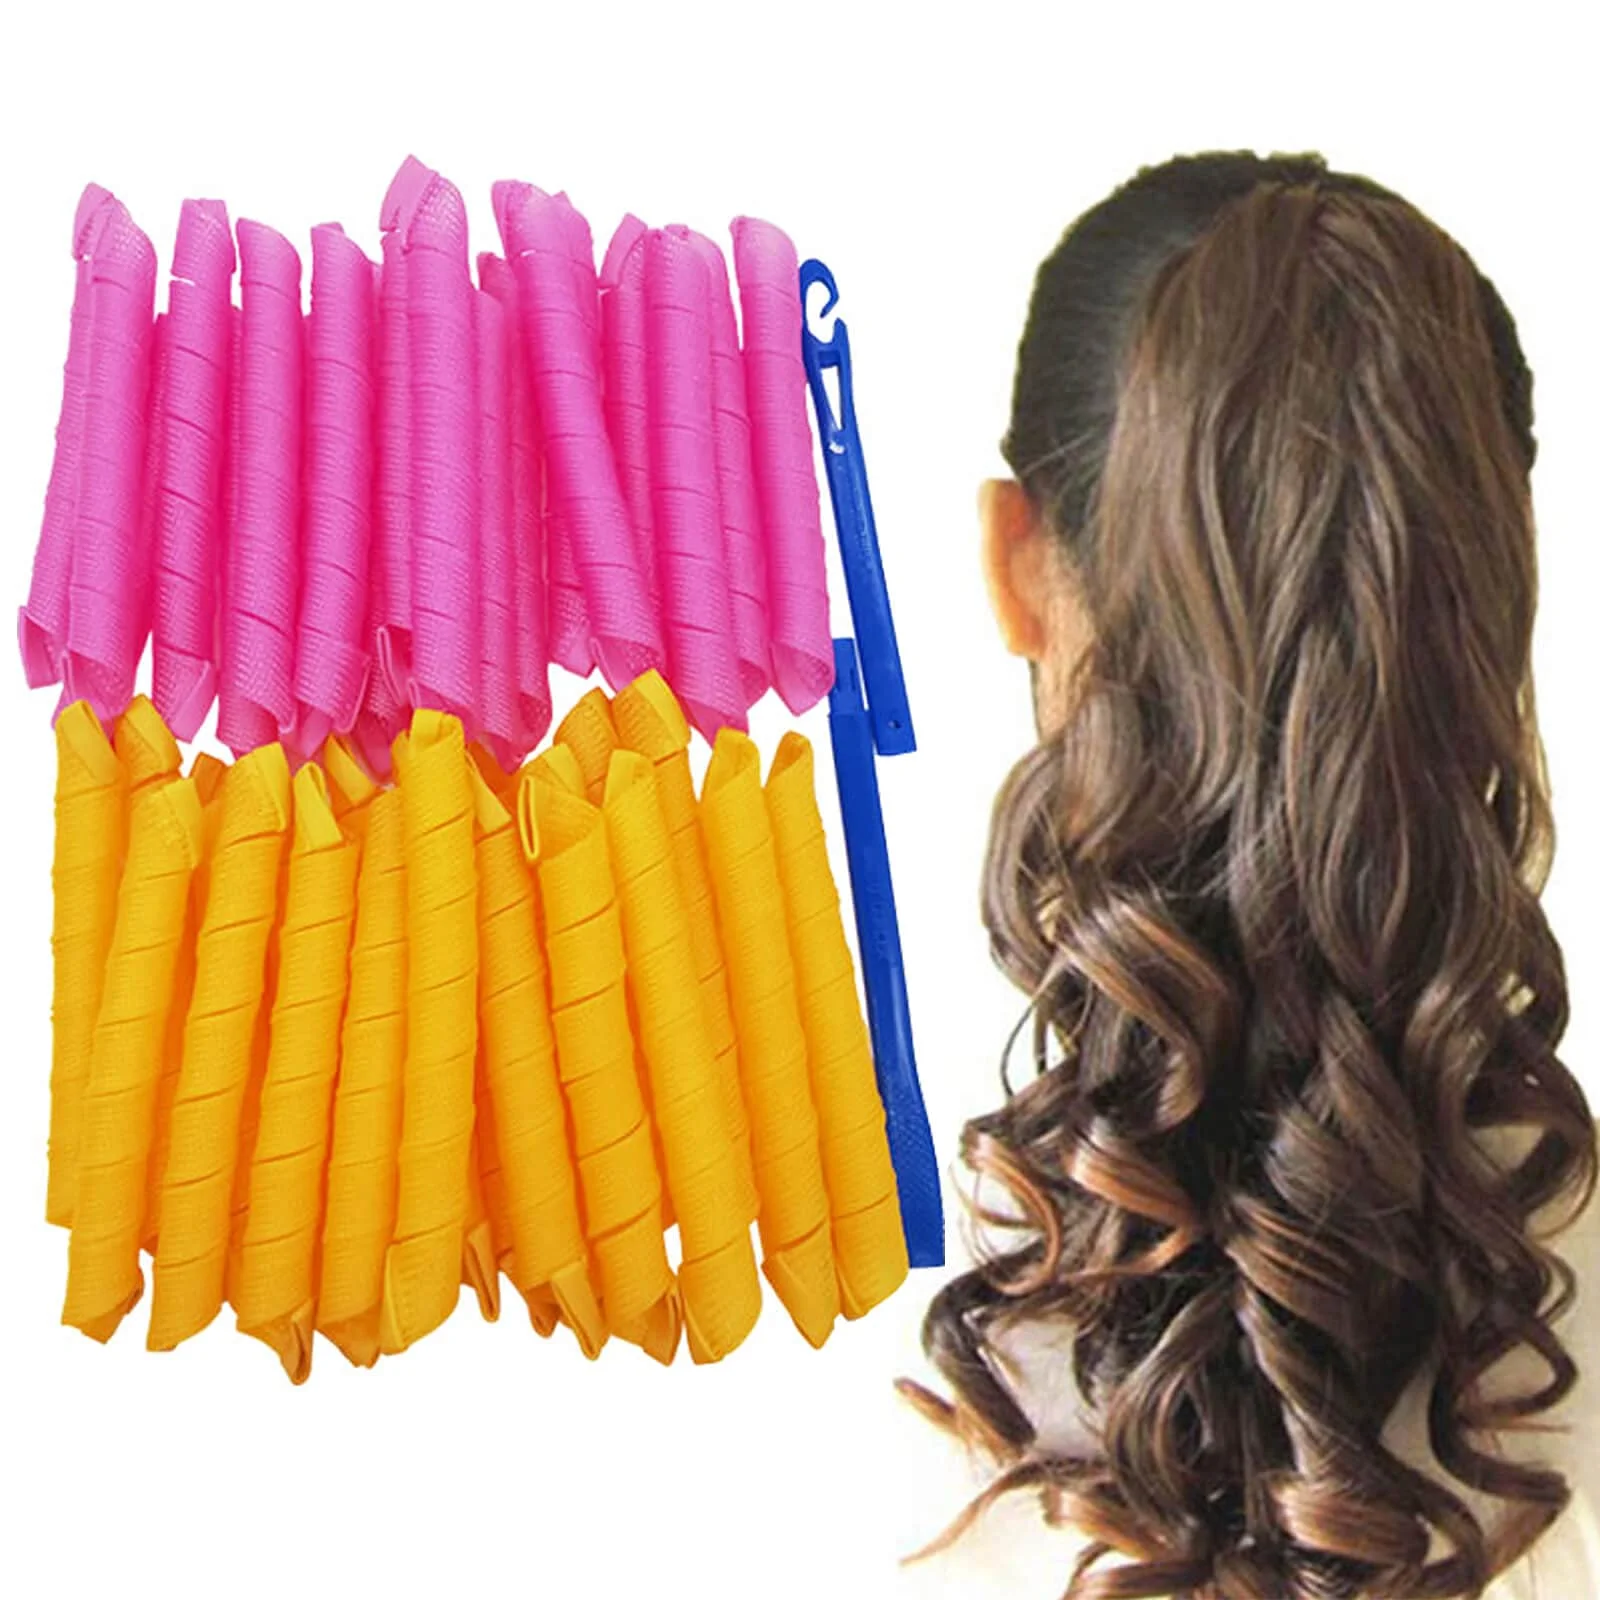 Hot Selling Magic Hair Curlers Curls Styling Kit Diy Heartless Hair Rollers  For Long Hair - Buy Magic Hair Curlers,Heartless Hair Rollers For Long Hair, Hot Selling Hair Curlers Product on 